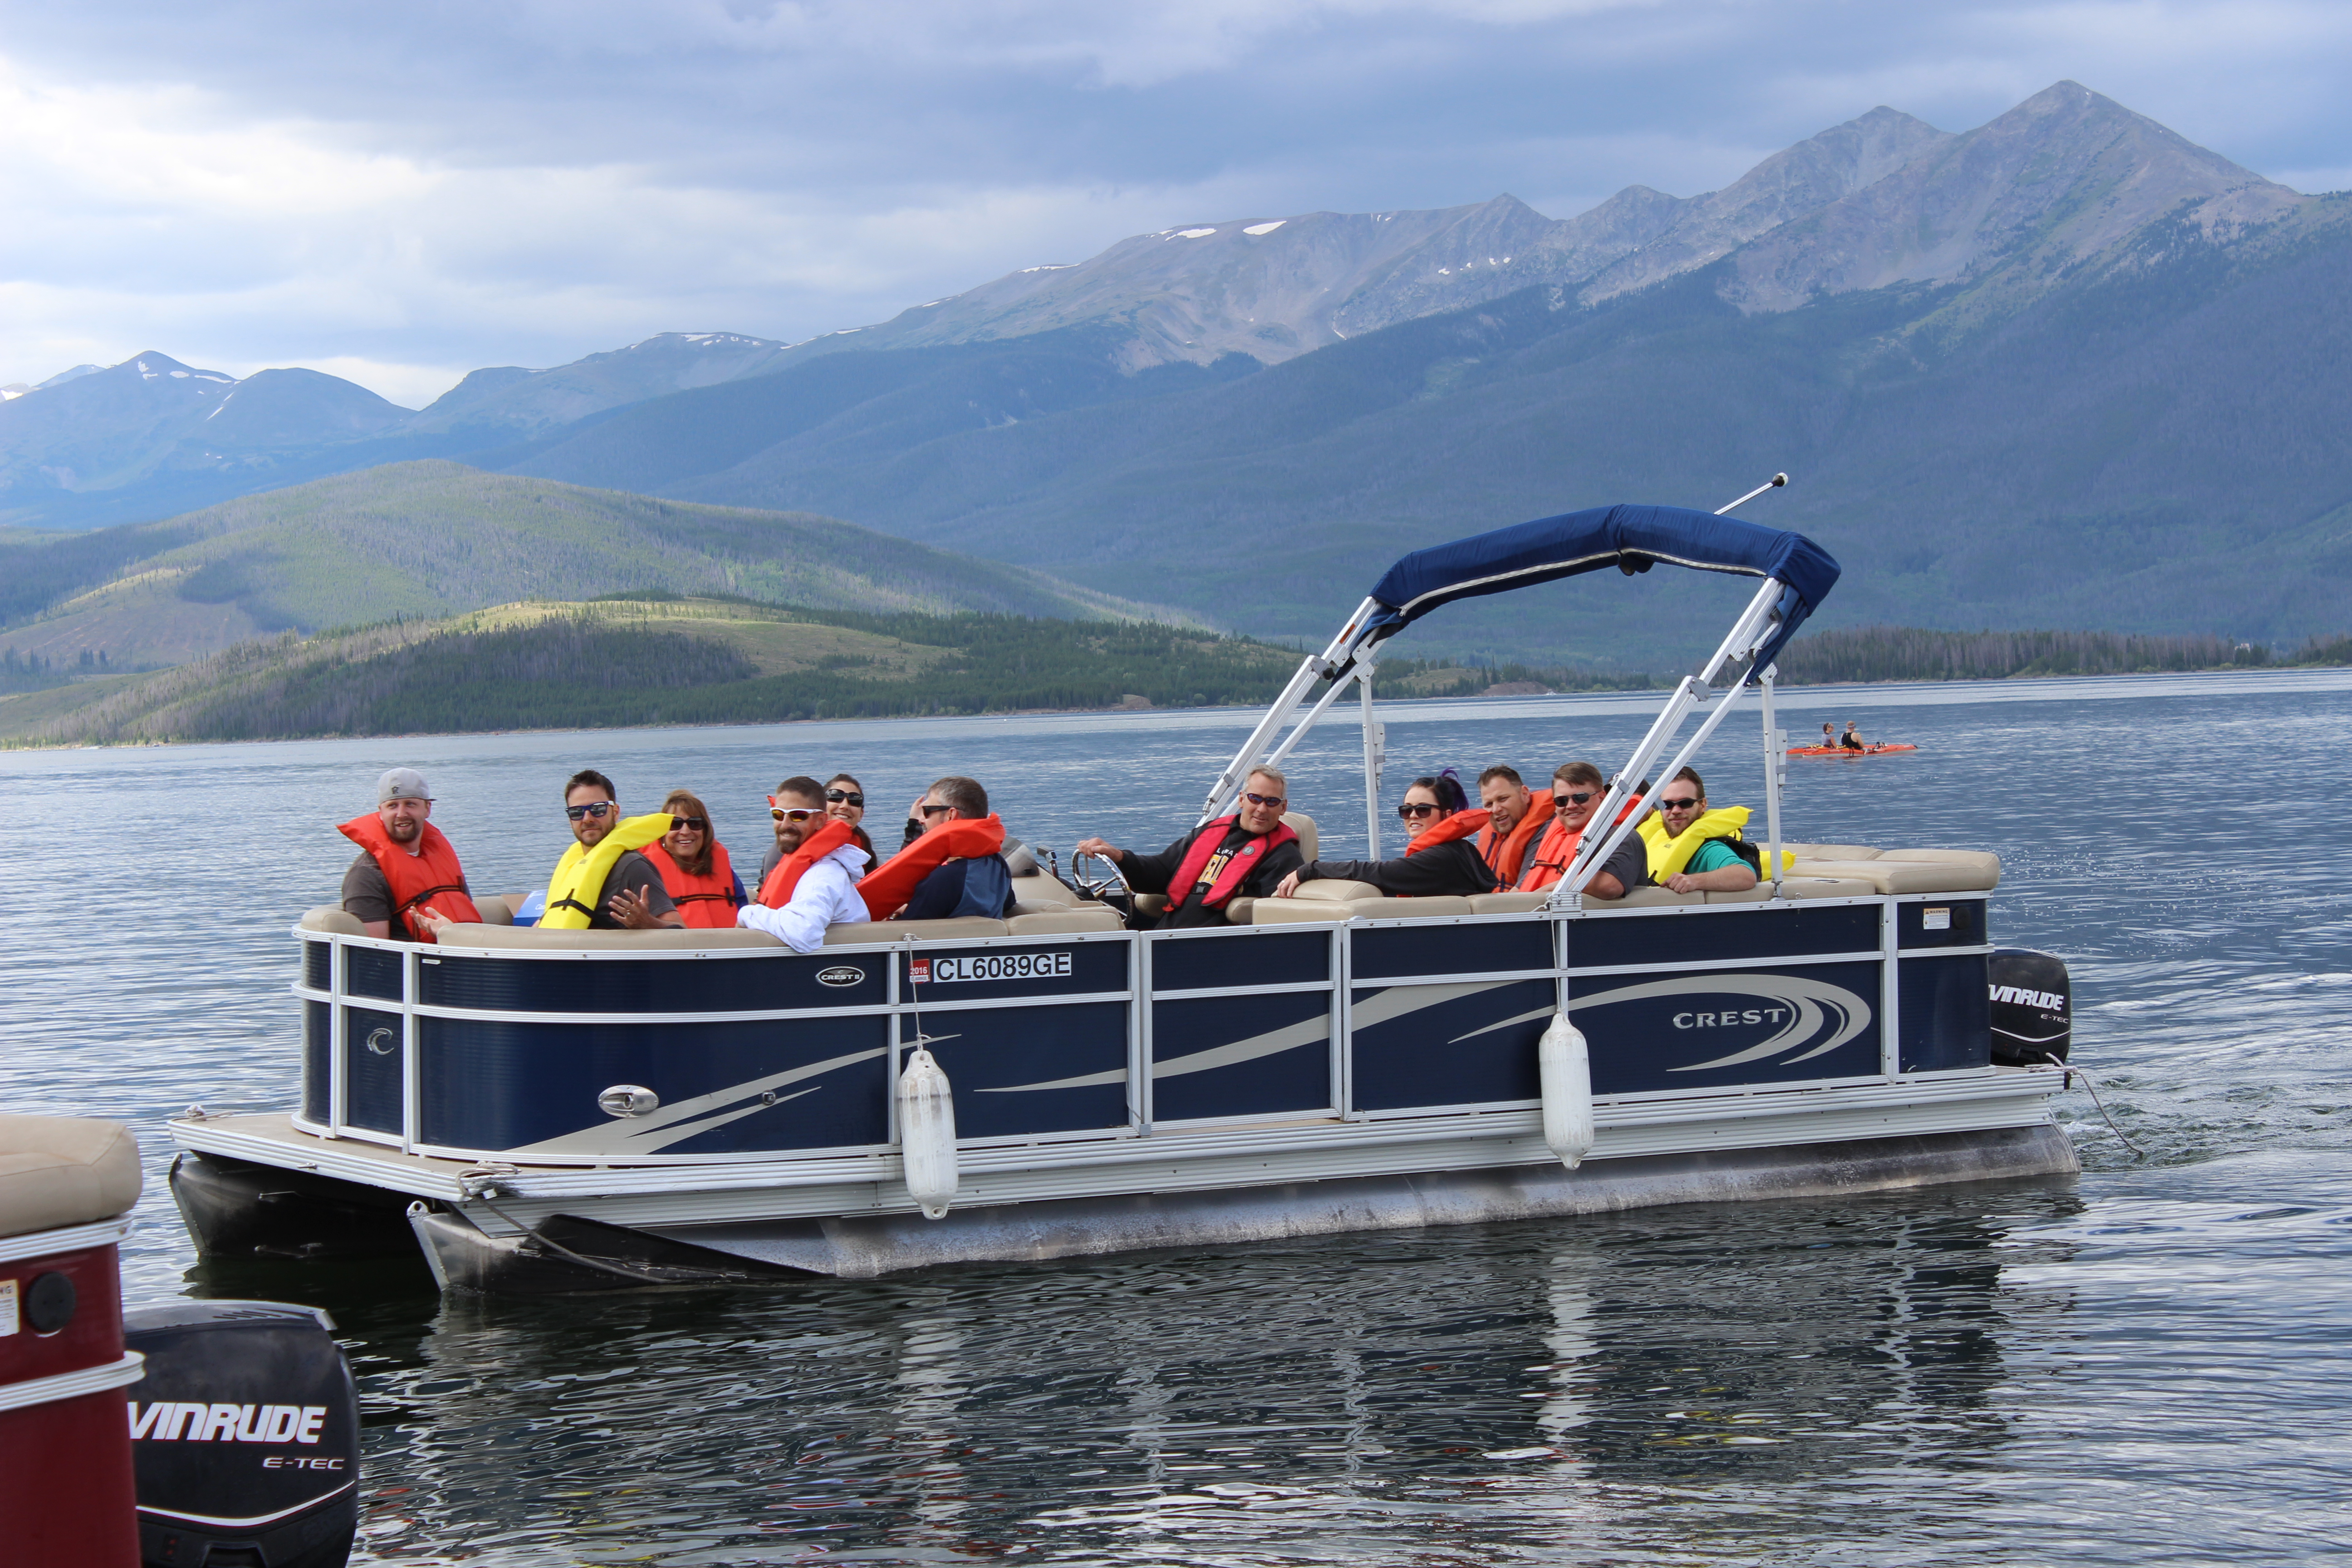 Employees on a boat at Dillon Reservoir to see how operations work.